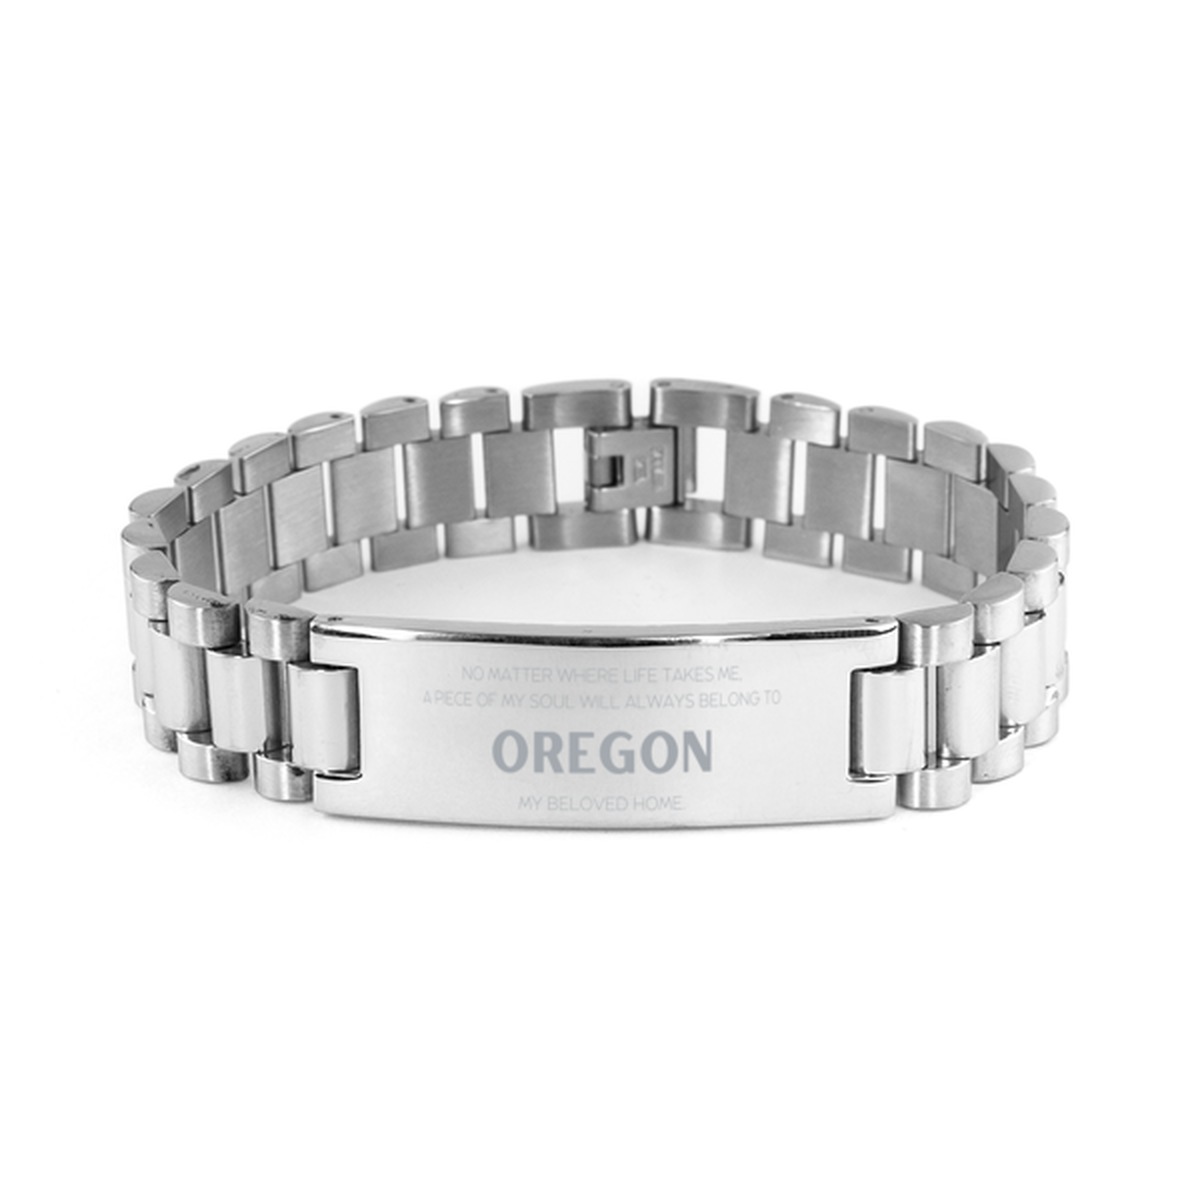 Love Oregon State Gifts, My soul will always belong to Oregon, Proud Ladder Stainless Steel Bracelet, Birthday Unique Gifts For Oregon Men, Women, Friends